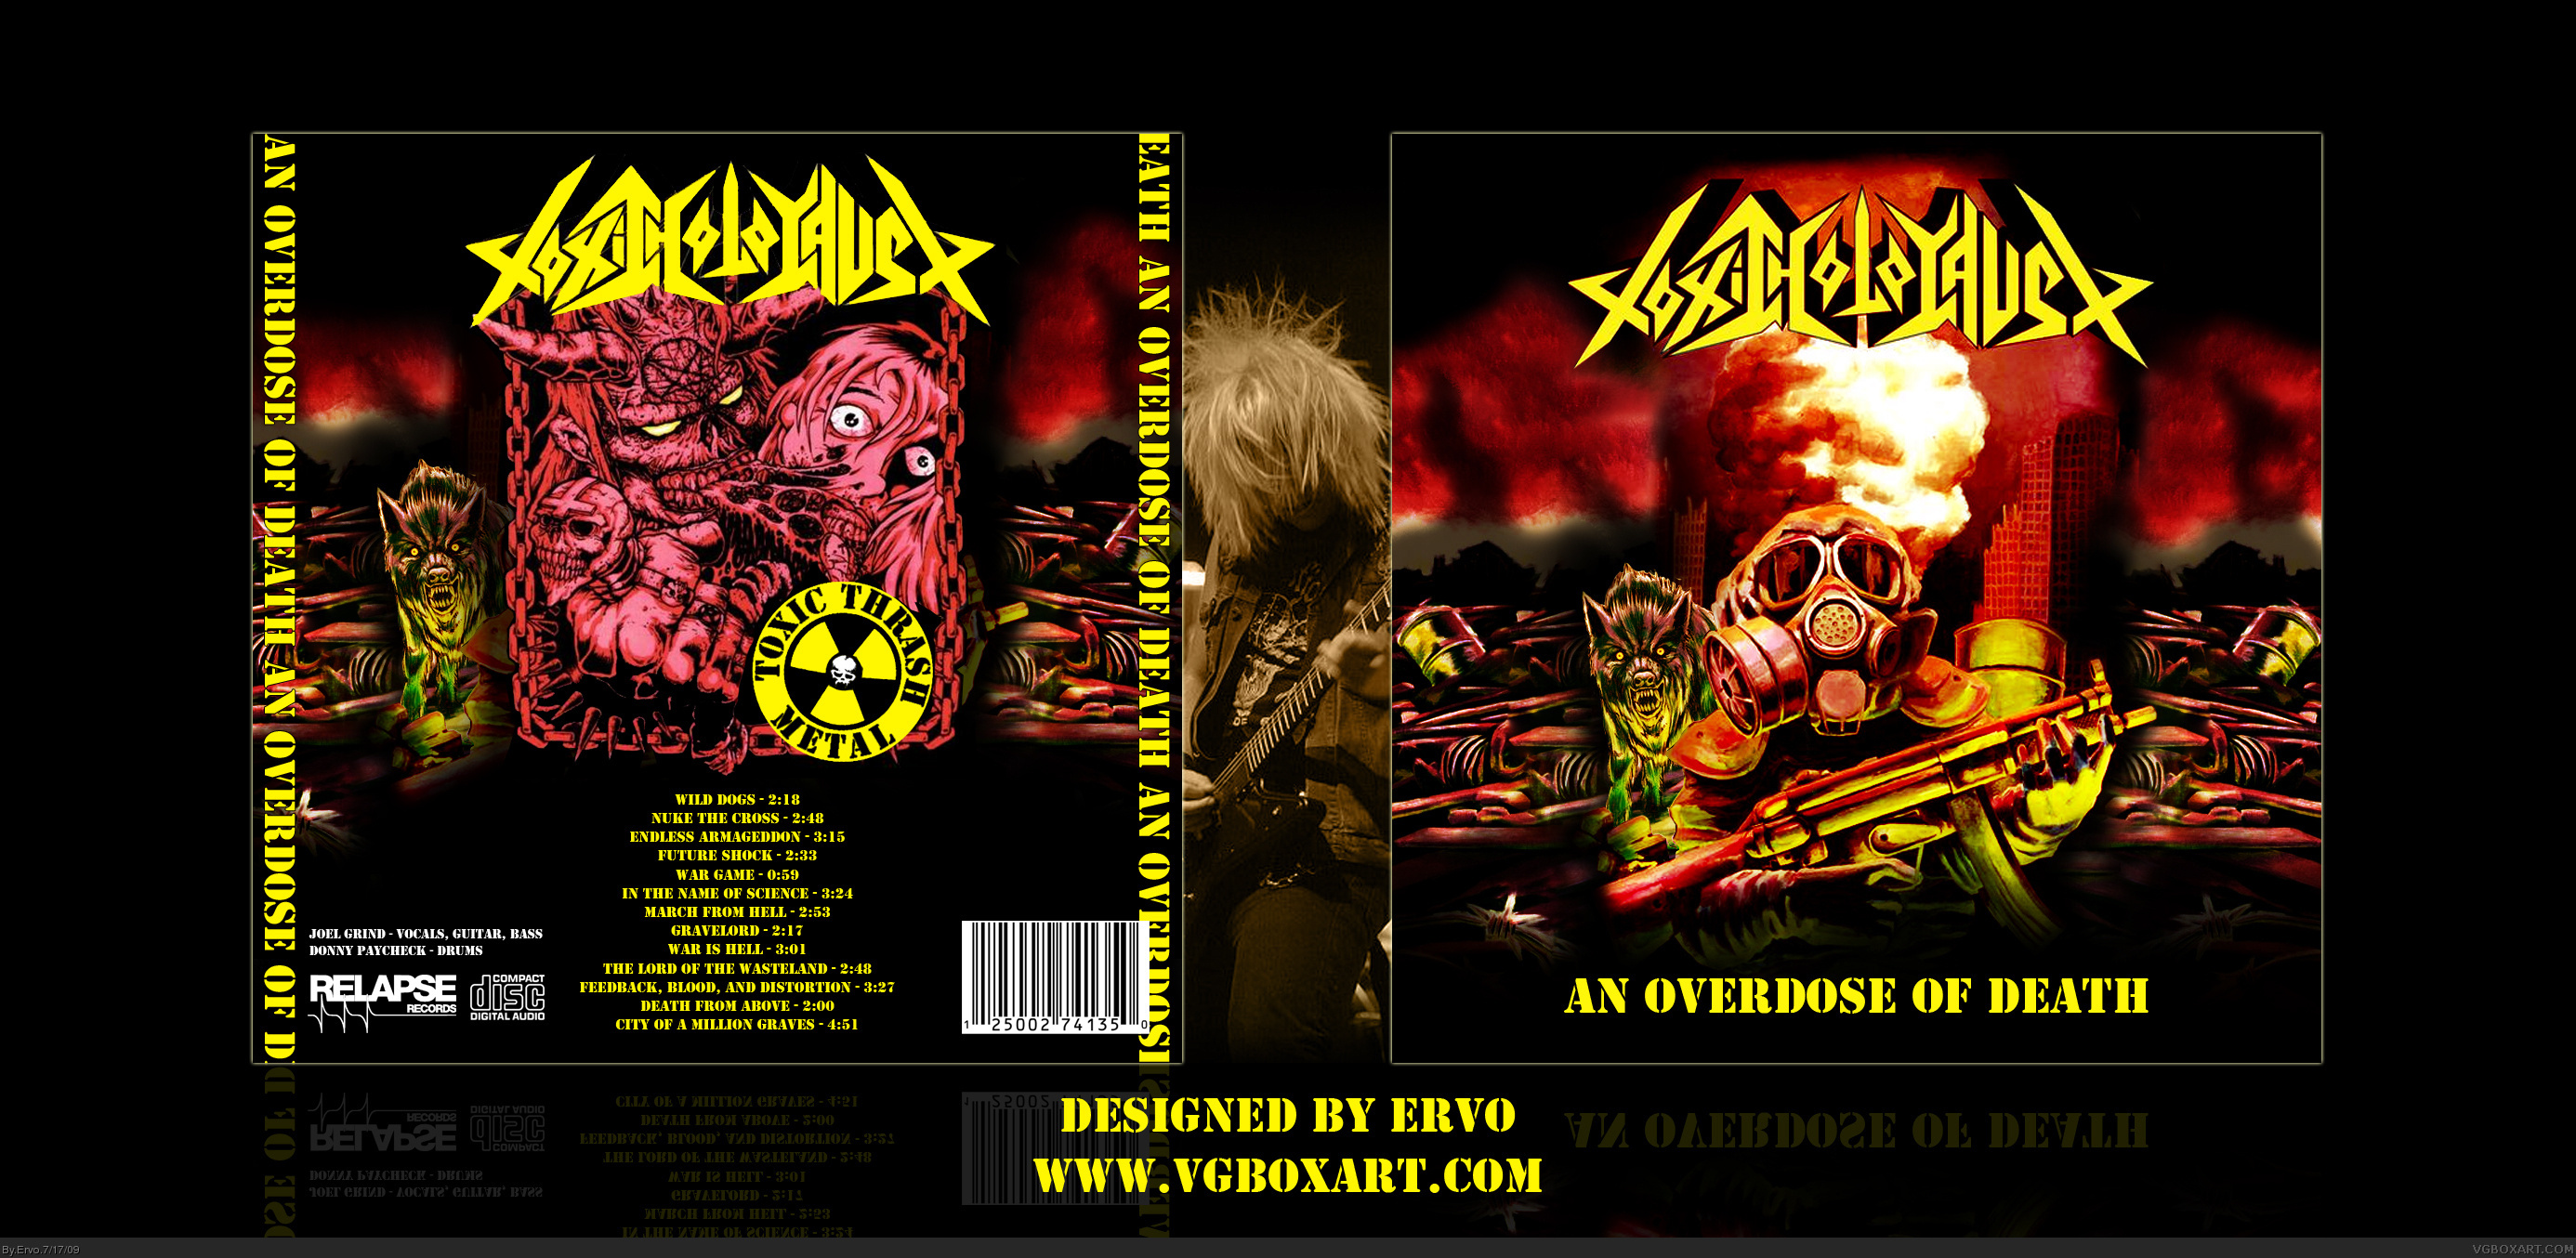 Toxic Holocaust - An Overdose Of Death box cover